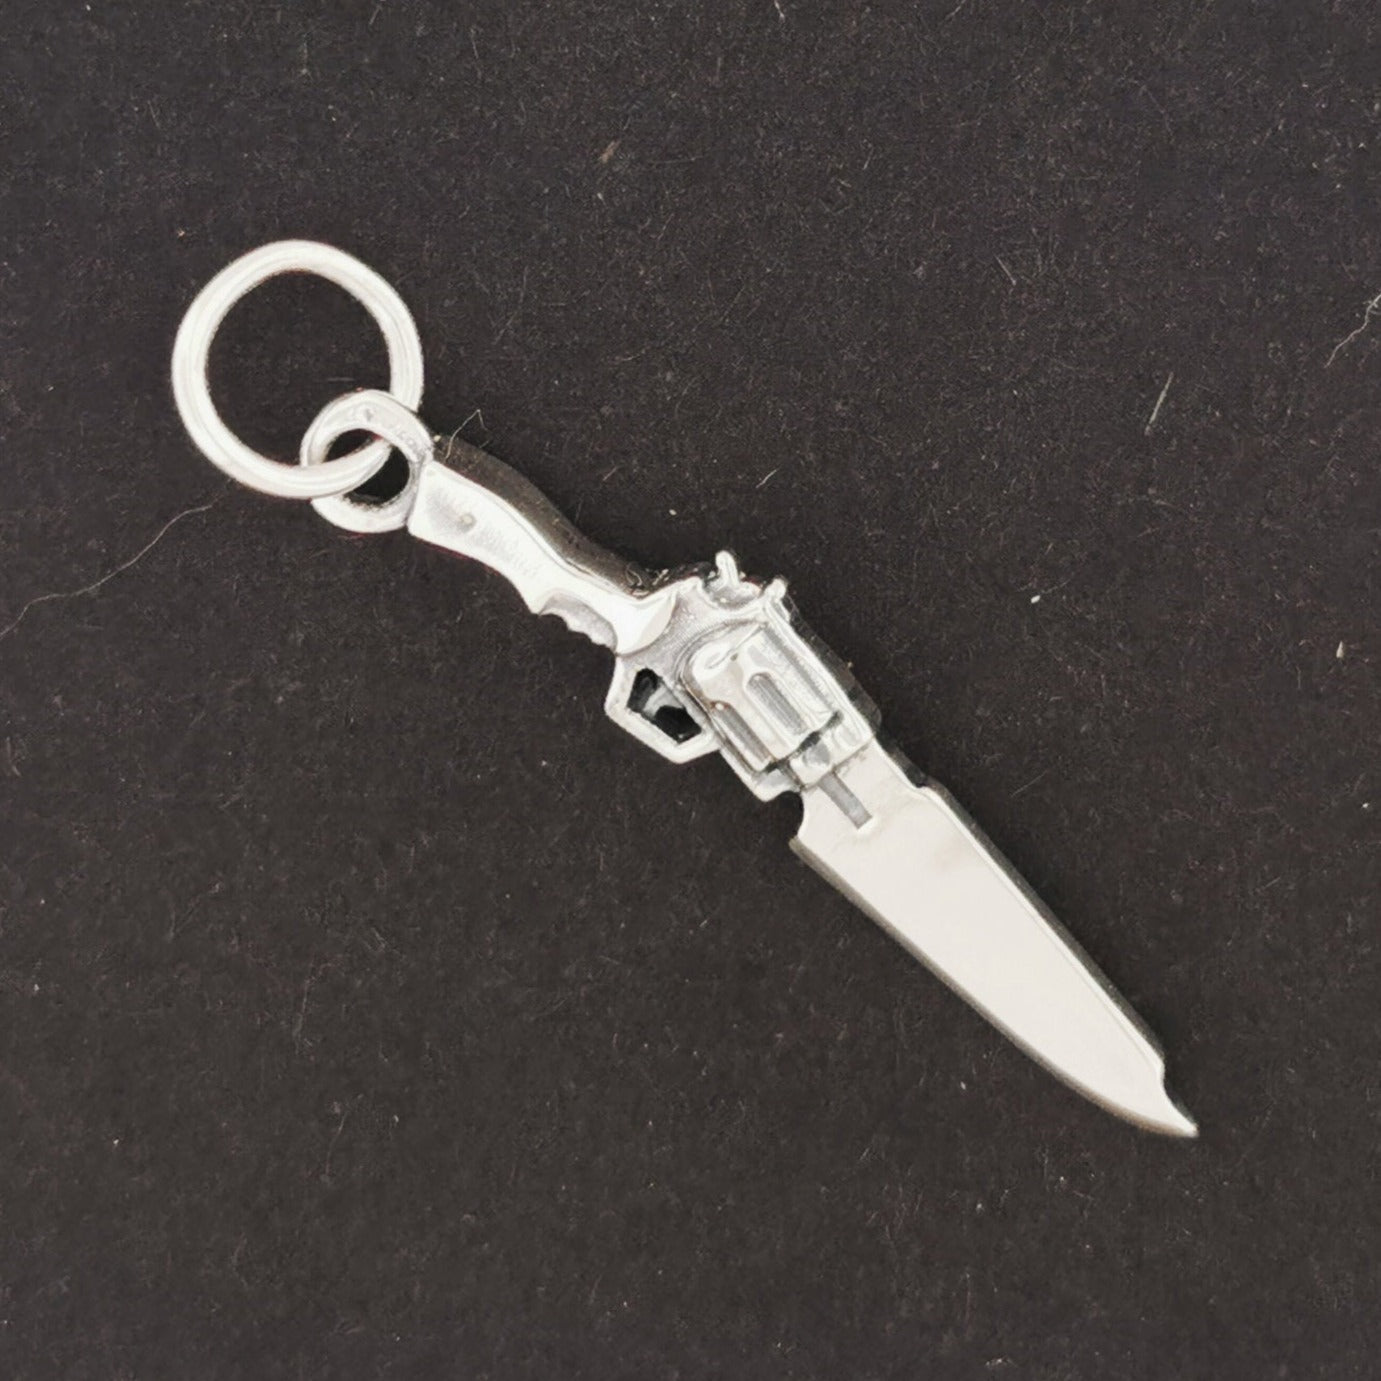 Final Fantasy 8 Gunblade Charm in Sterling Silver or Antique Bronze, FF8 Squall Pendant, Final Fantasy VIII Pendant, Final Fantasy Jewelry, final fantasy pendant, FF8 silver charm, FF8 Gunblade pendant, silver Gunblade pendant, gamer girl jewelry